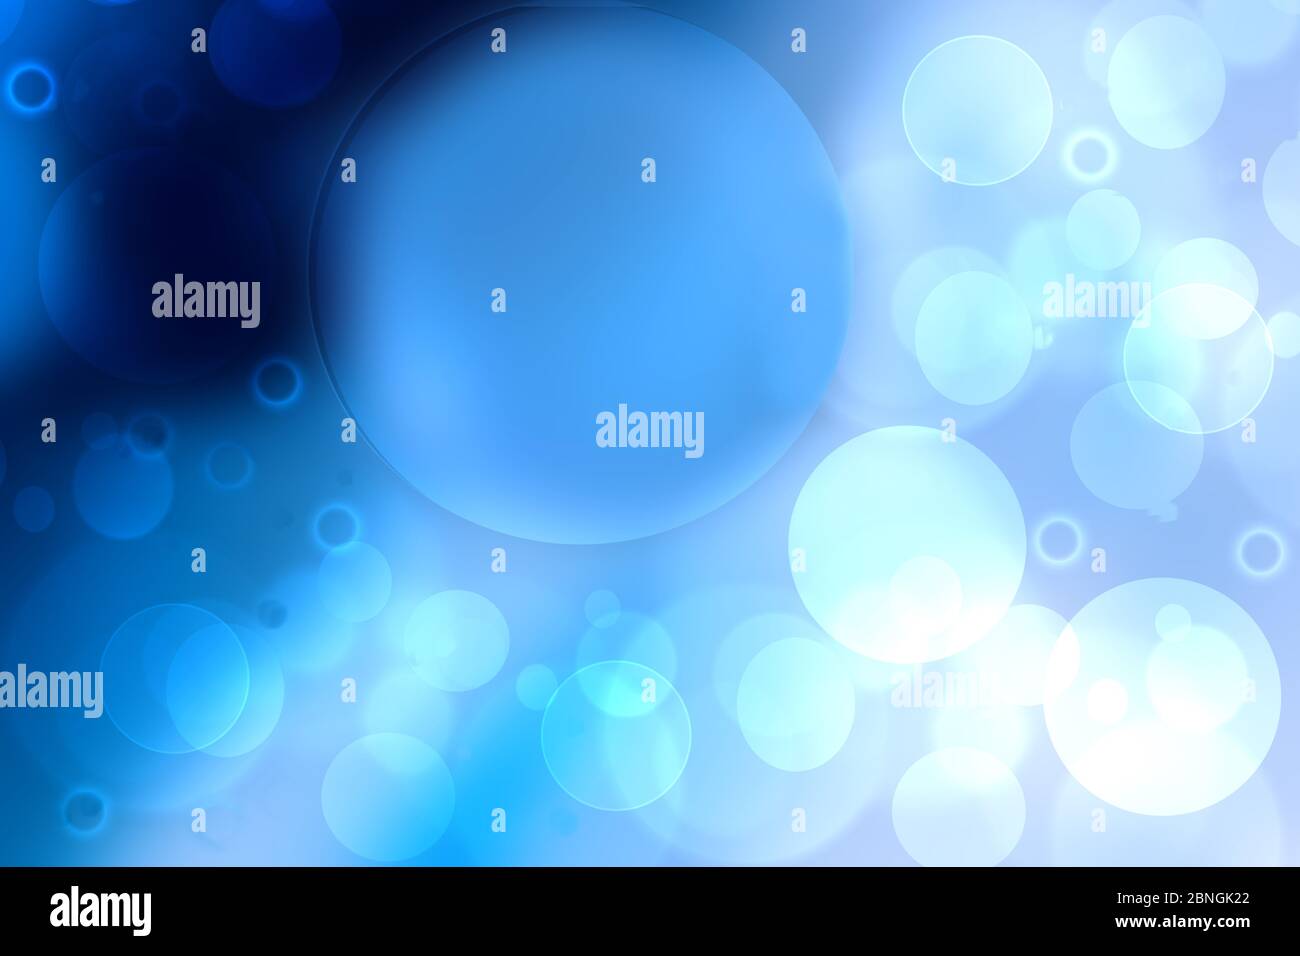 Abstract Gradient Of Light Blue Turquoise Dark Blue Background Texture With Glowing Circular Bokeh Lights Beautiful Colorful Spring Or Summer Backdro Stock Photo Alamy